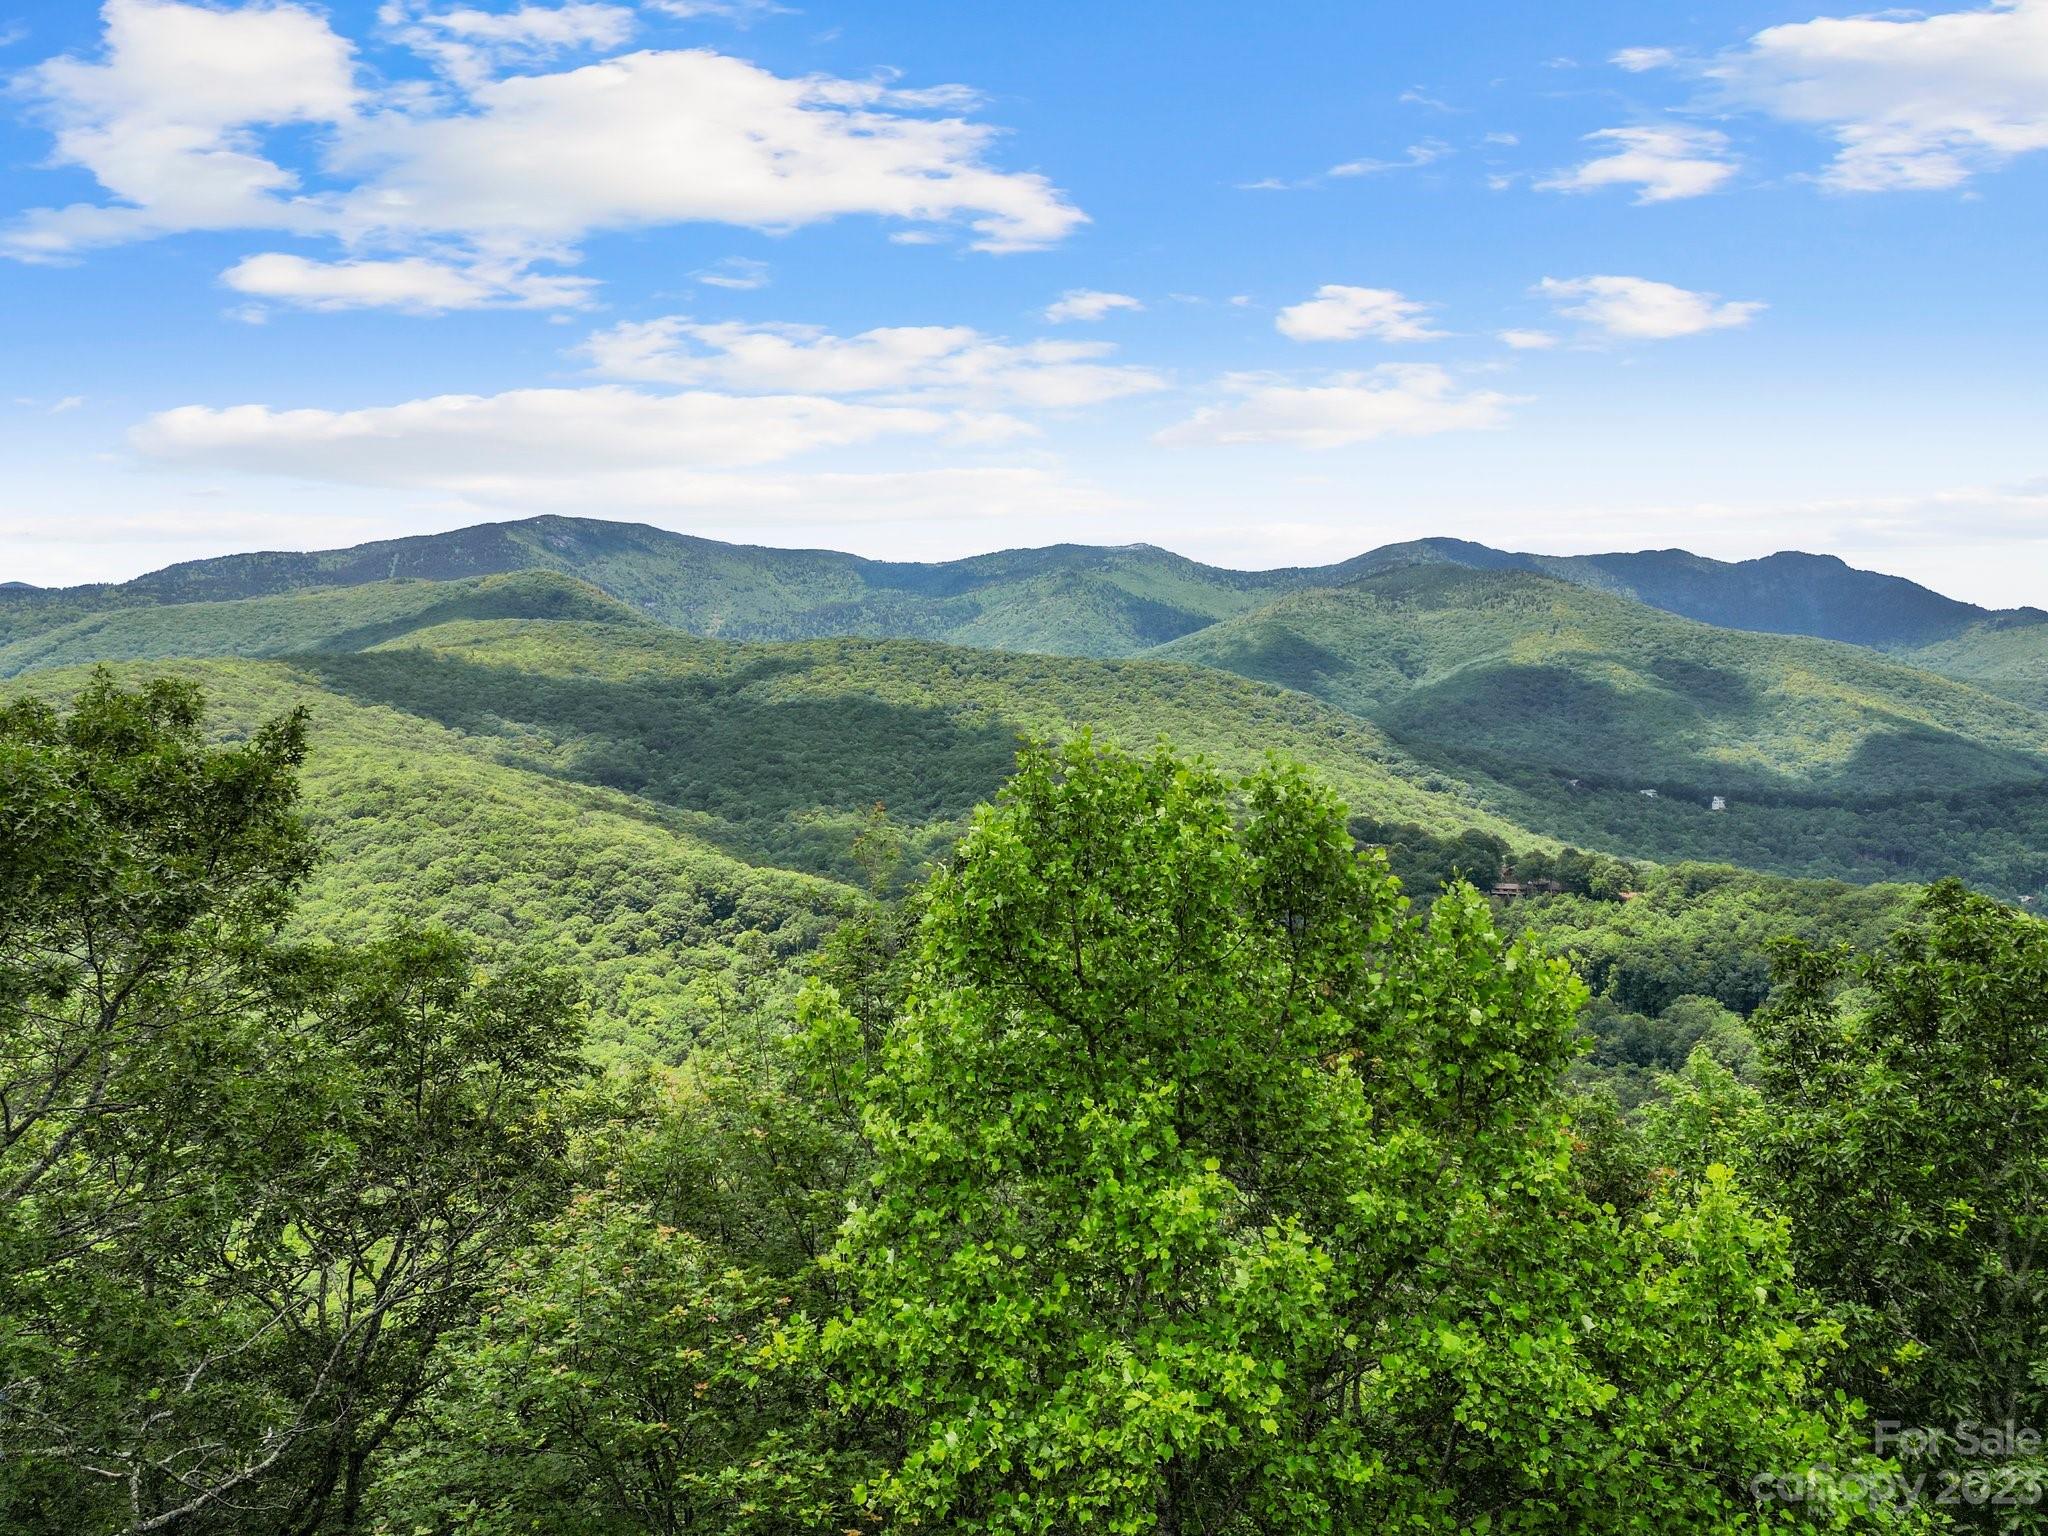 a view of a mountain range with lush green forest